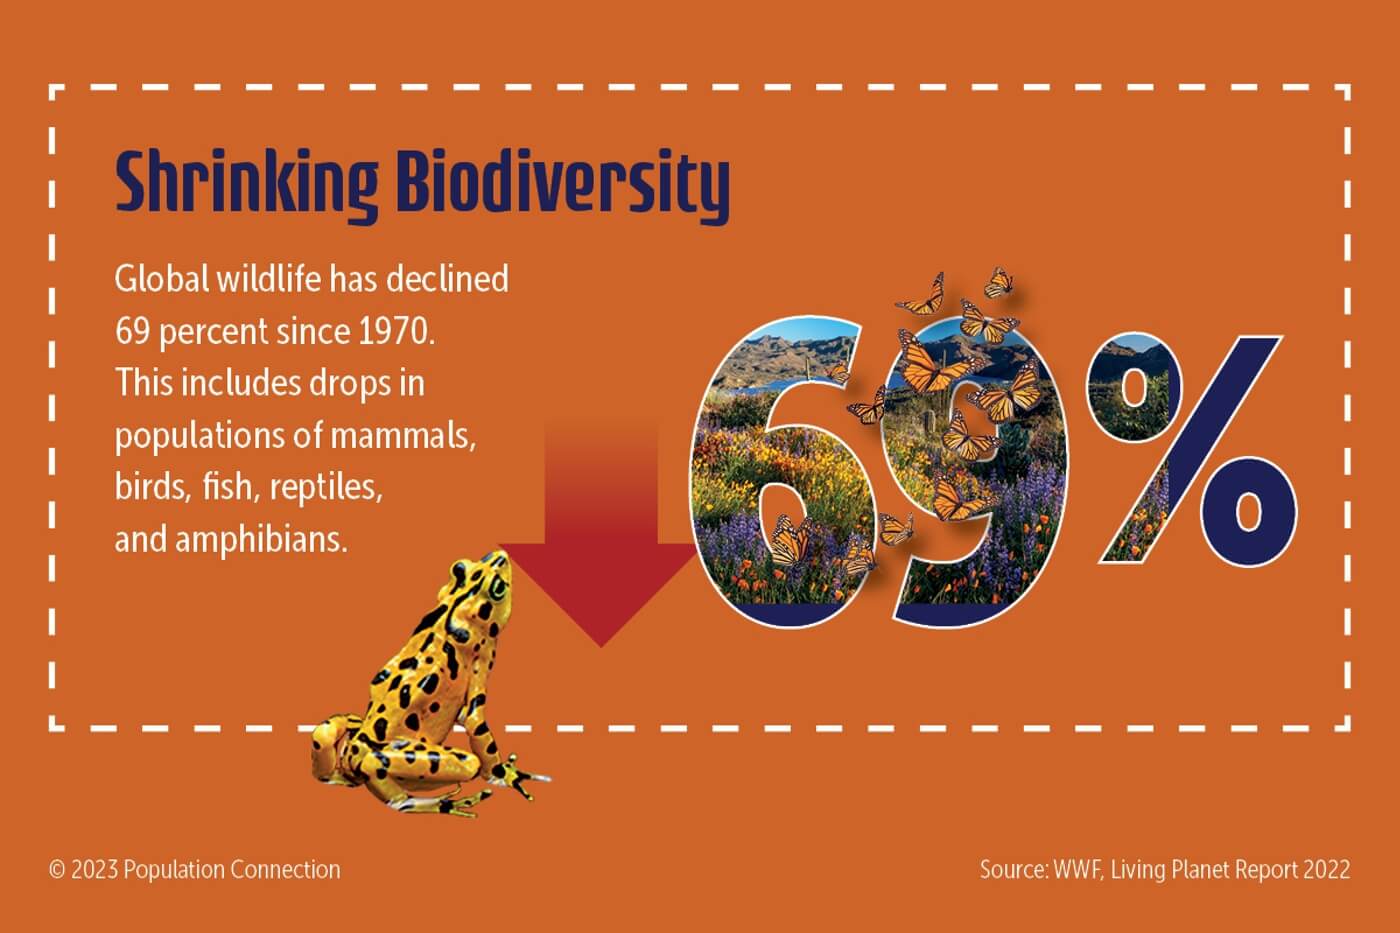 A poster that shows the percentage of shrinking biodiversity - a 69 percent decrease in biodiversity since 1970